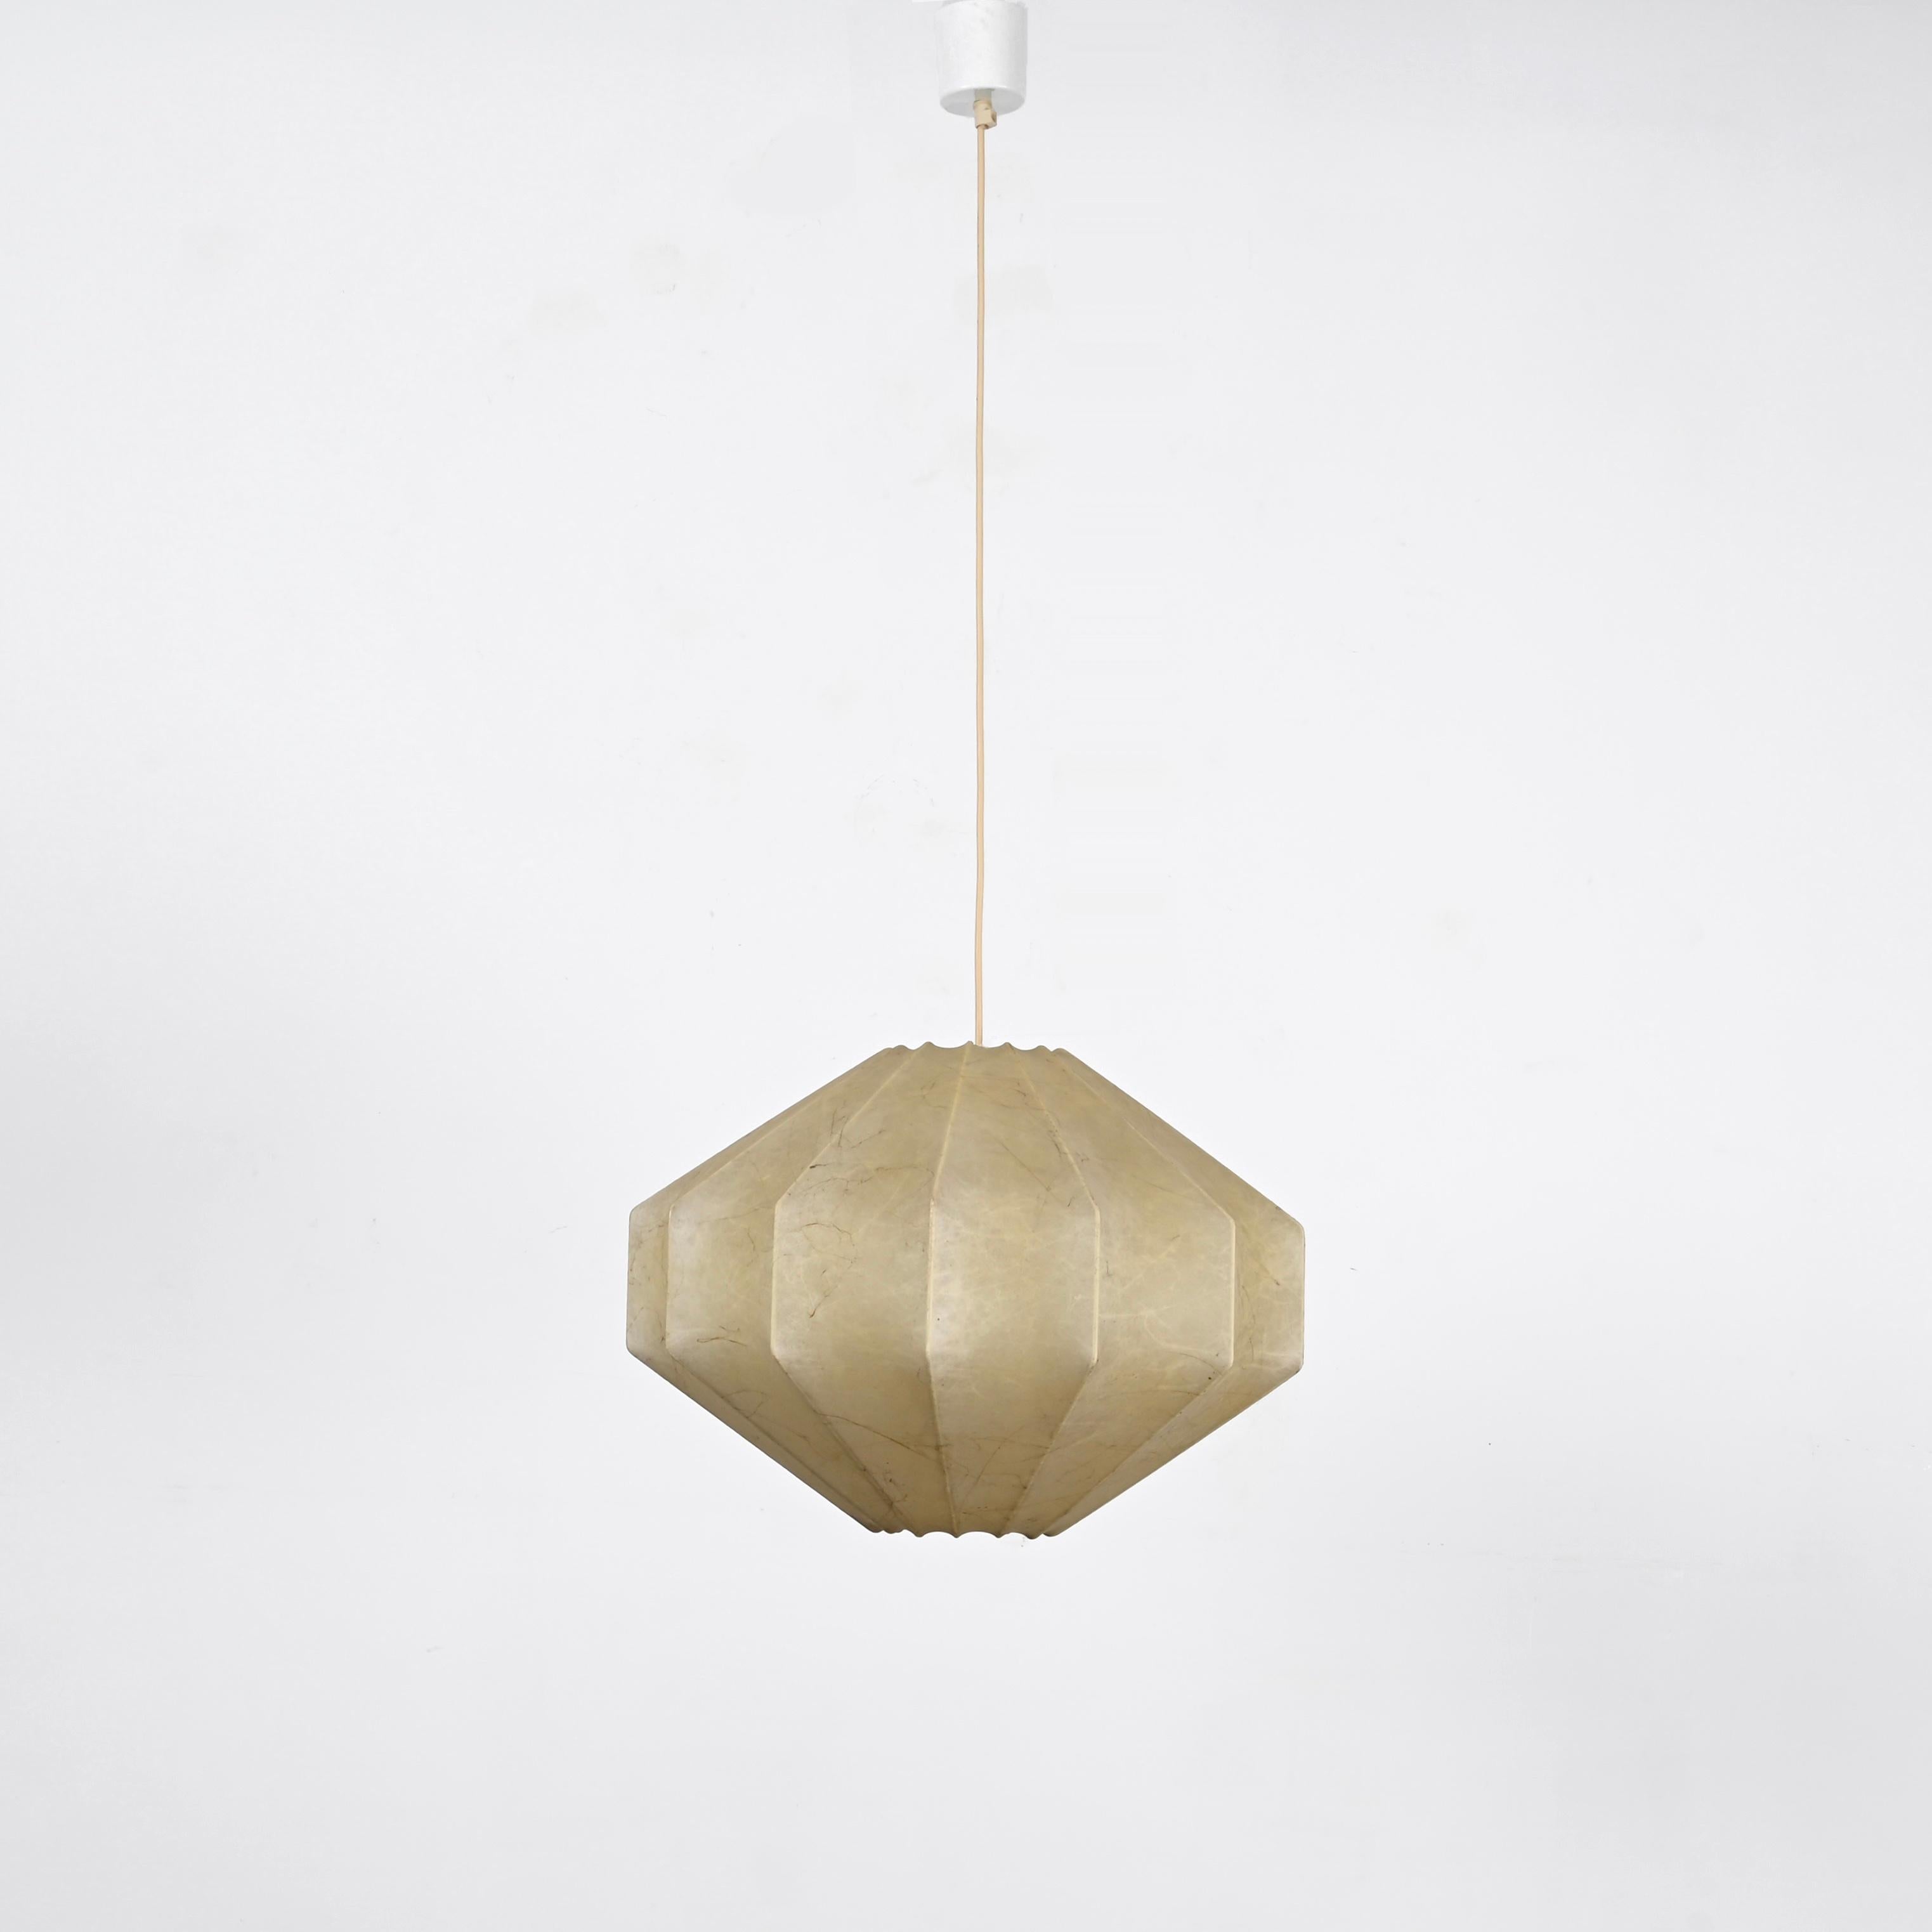 Stunning fully original mid-century losange cocoon pendant designed by Achille Castiglioni in Italy in the 1960s. 

This marvellous cocoon features a losange-shaped shade in natural soft resin with a fantastic vintage beige color, the metal